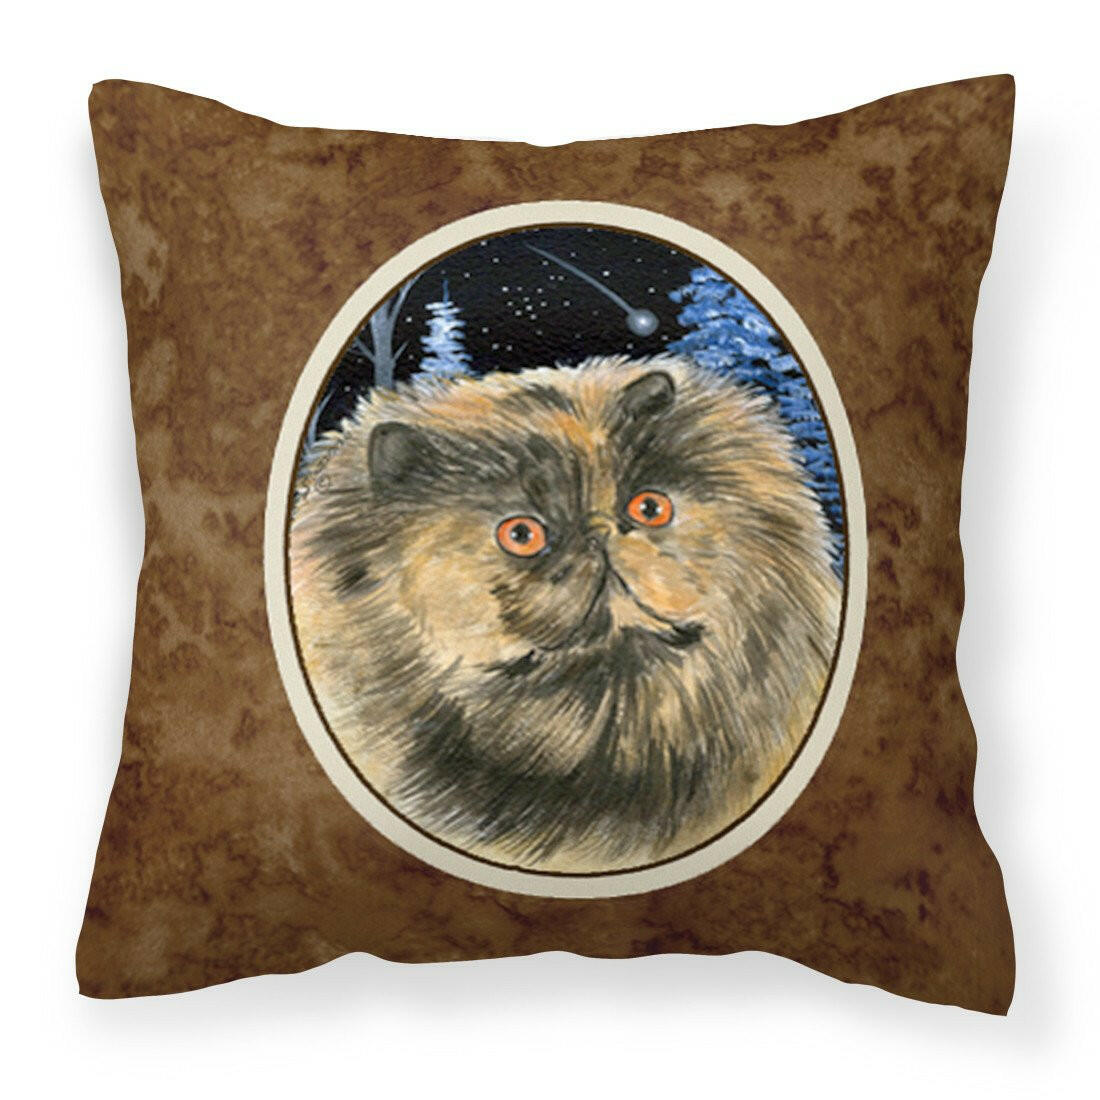 Starry Night Cat - Persian Fabric Decorative Pillow SS8408PW1414 by Caroline's Treasures